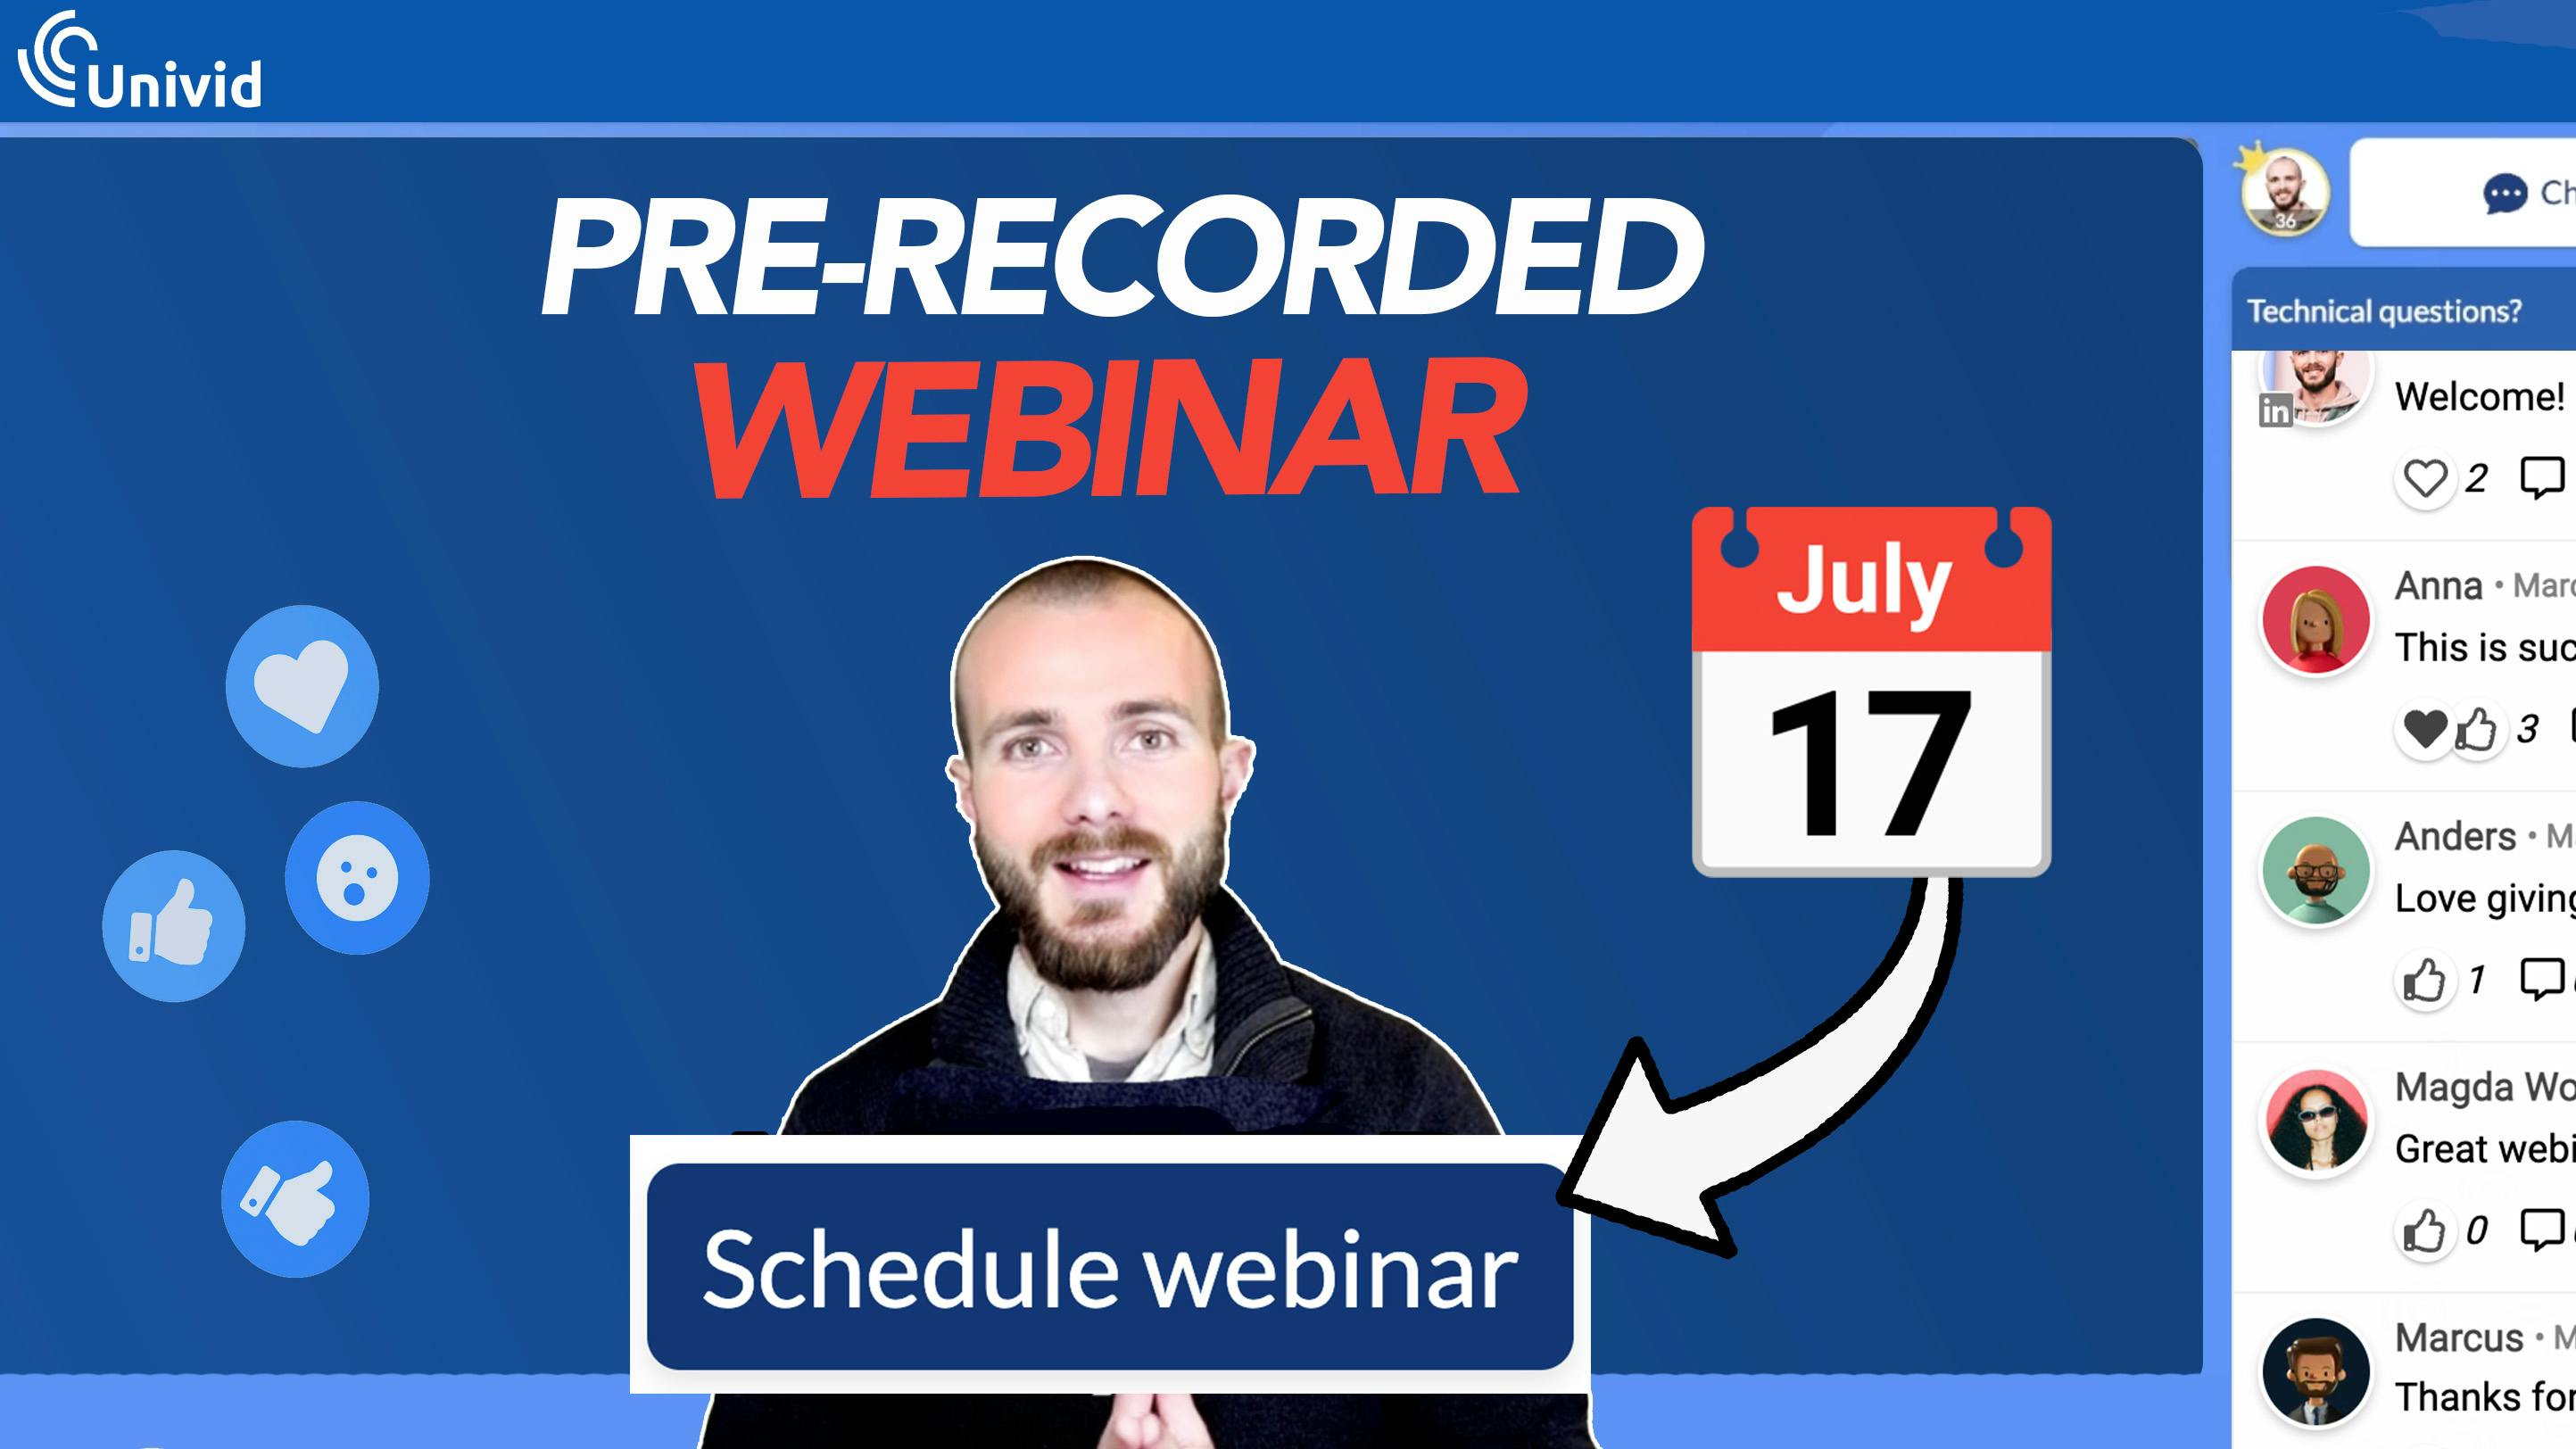 What is a pre-recorded webinar and how to create one in 4 steps